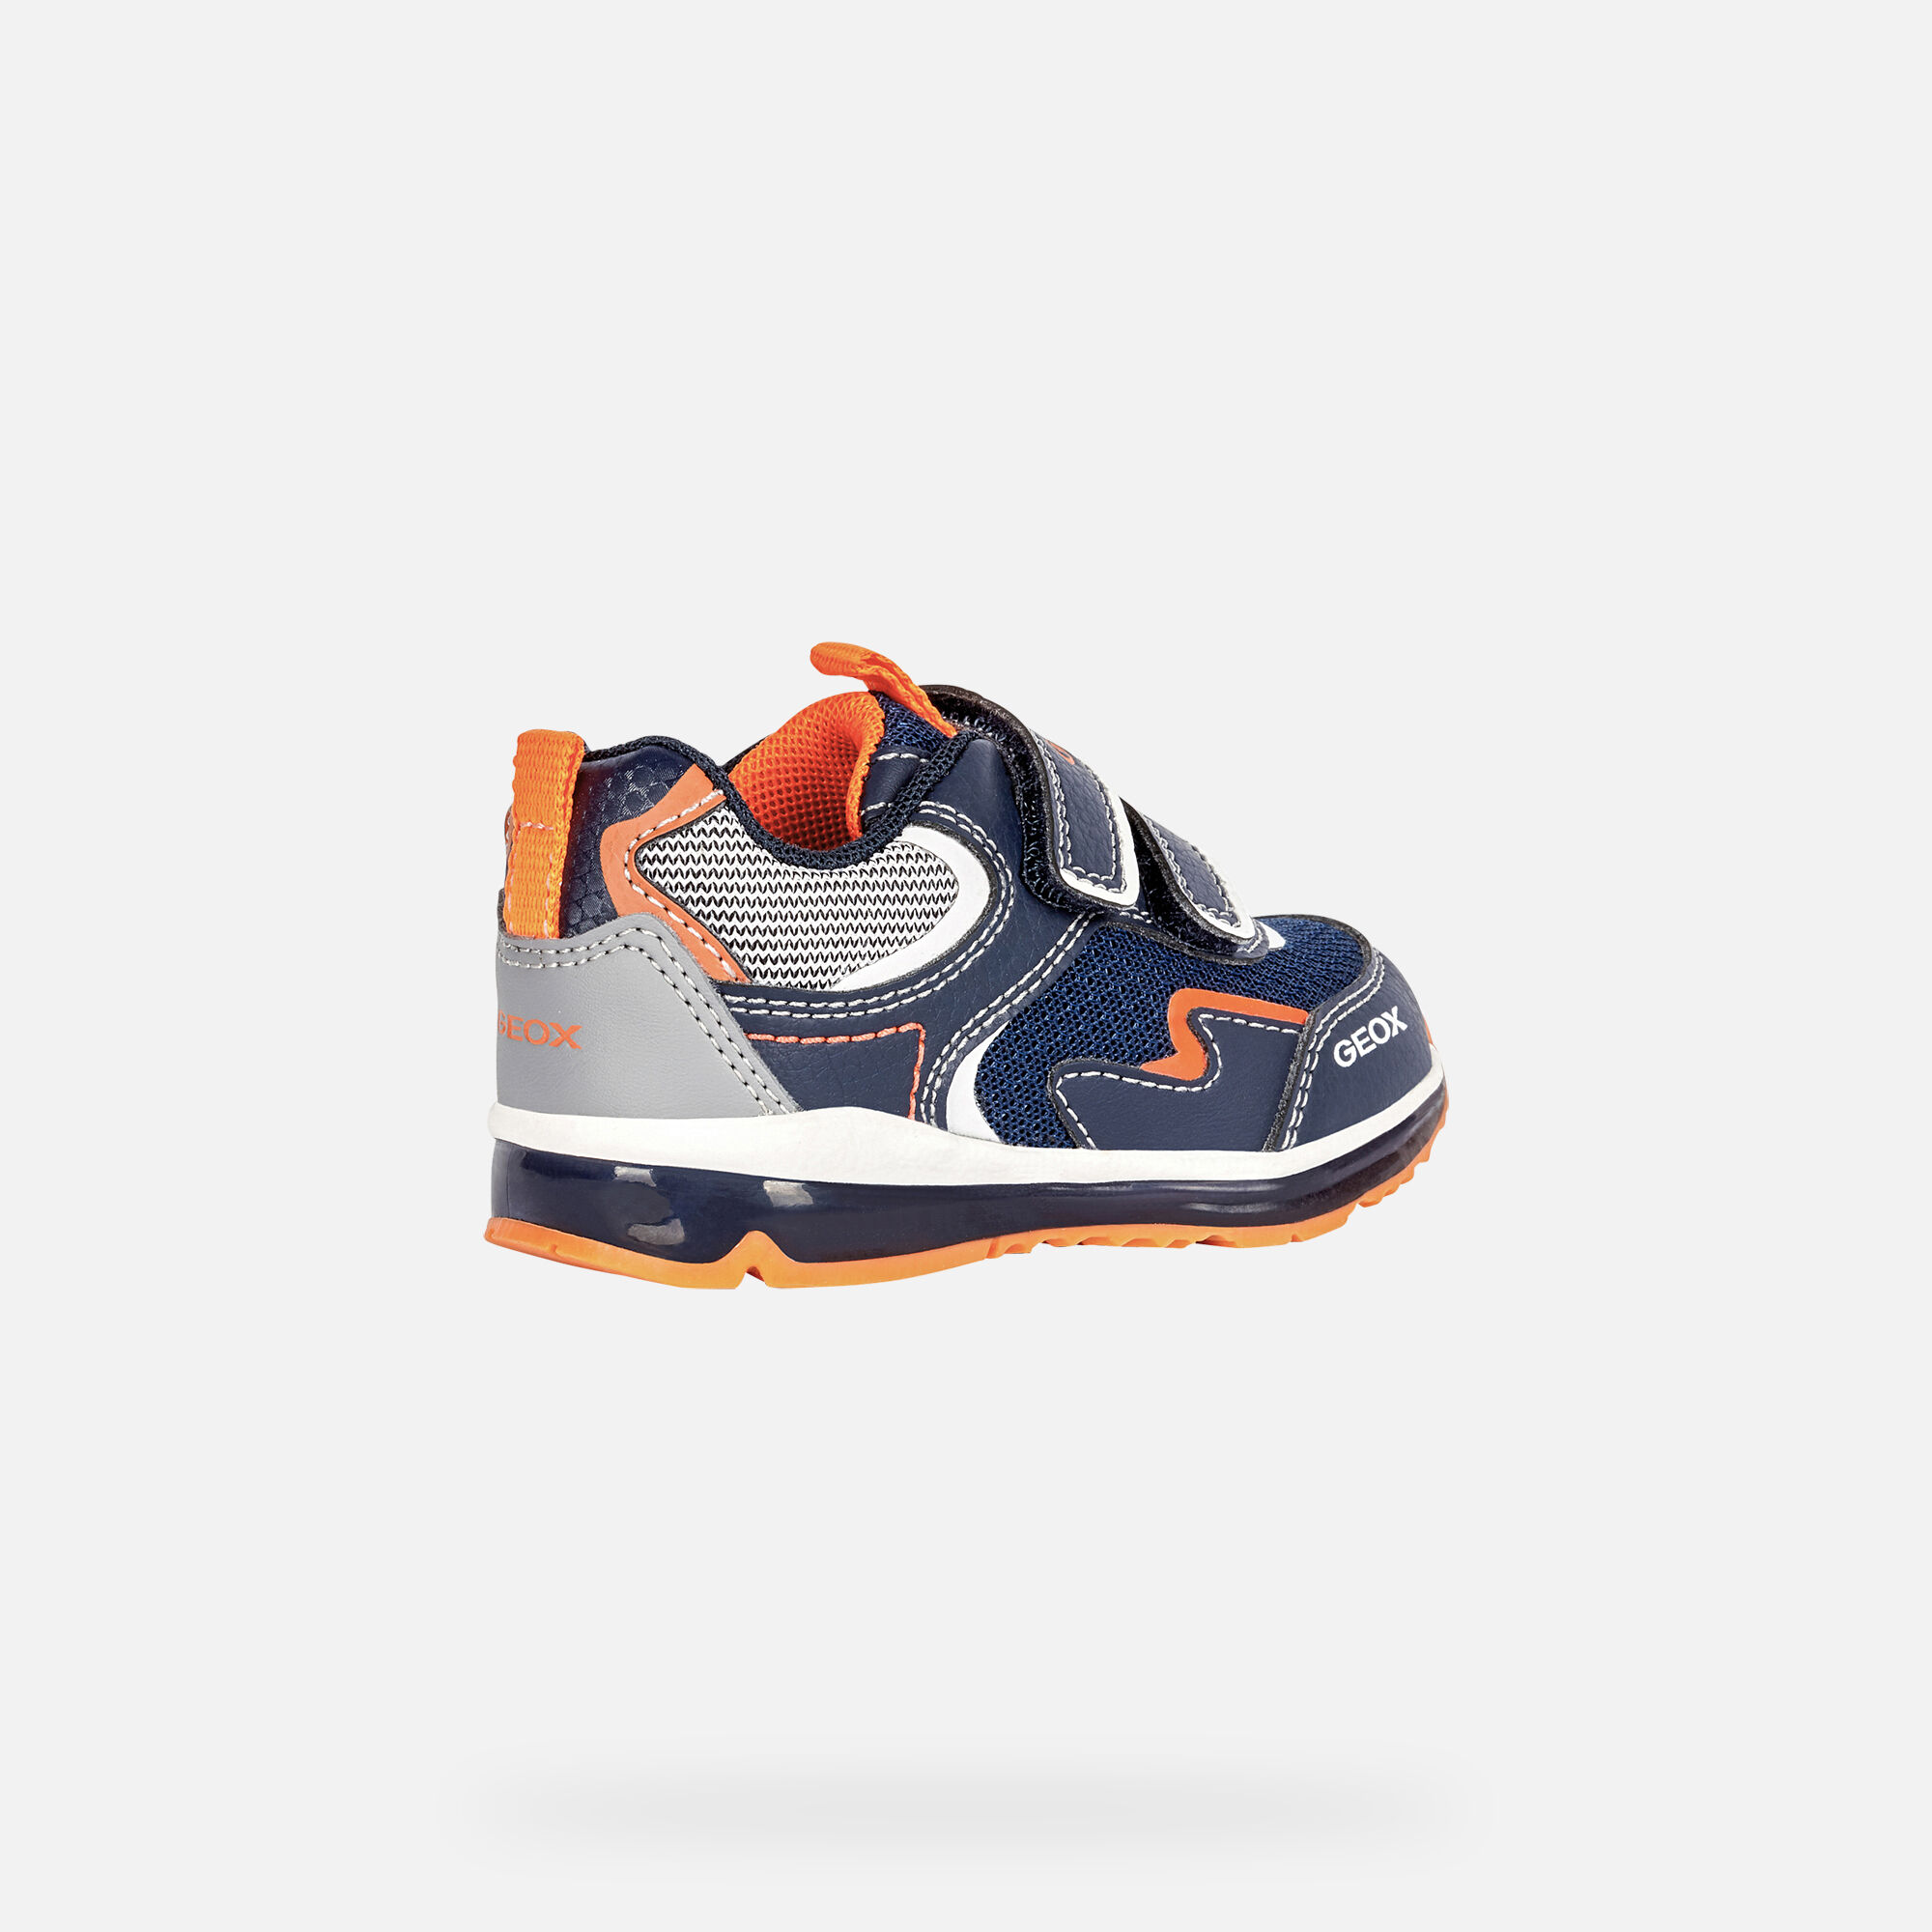 Geox® TODO Baby Boy: Navy blue and Neon 